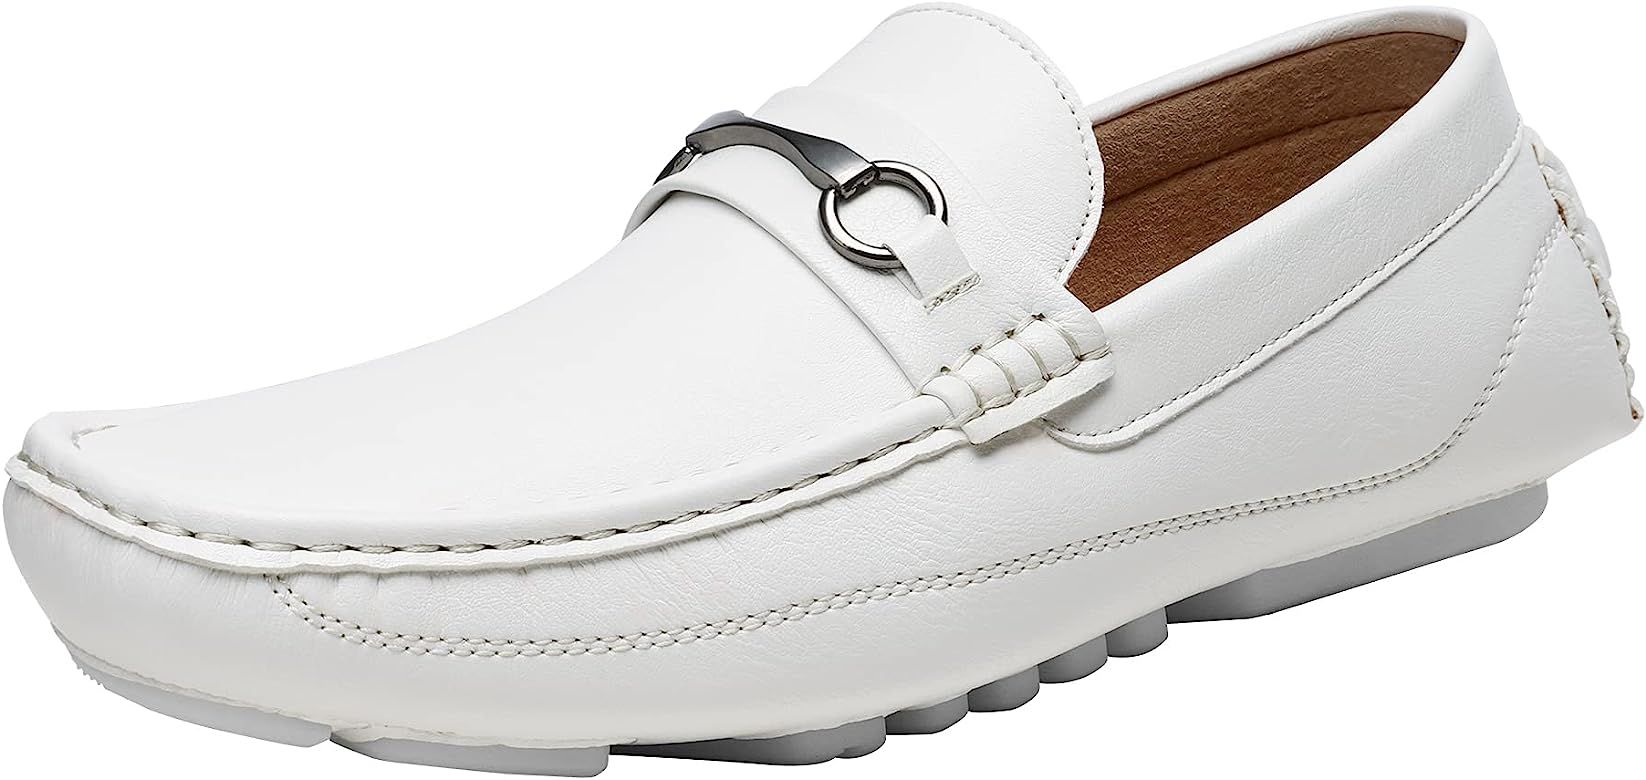 Bruno Marc Men's Driving Moccasins Penny Loafers Slip on Loafer Shoes | Amazon (US)